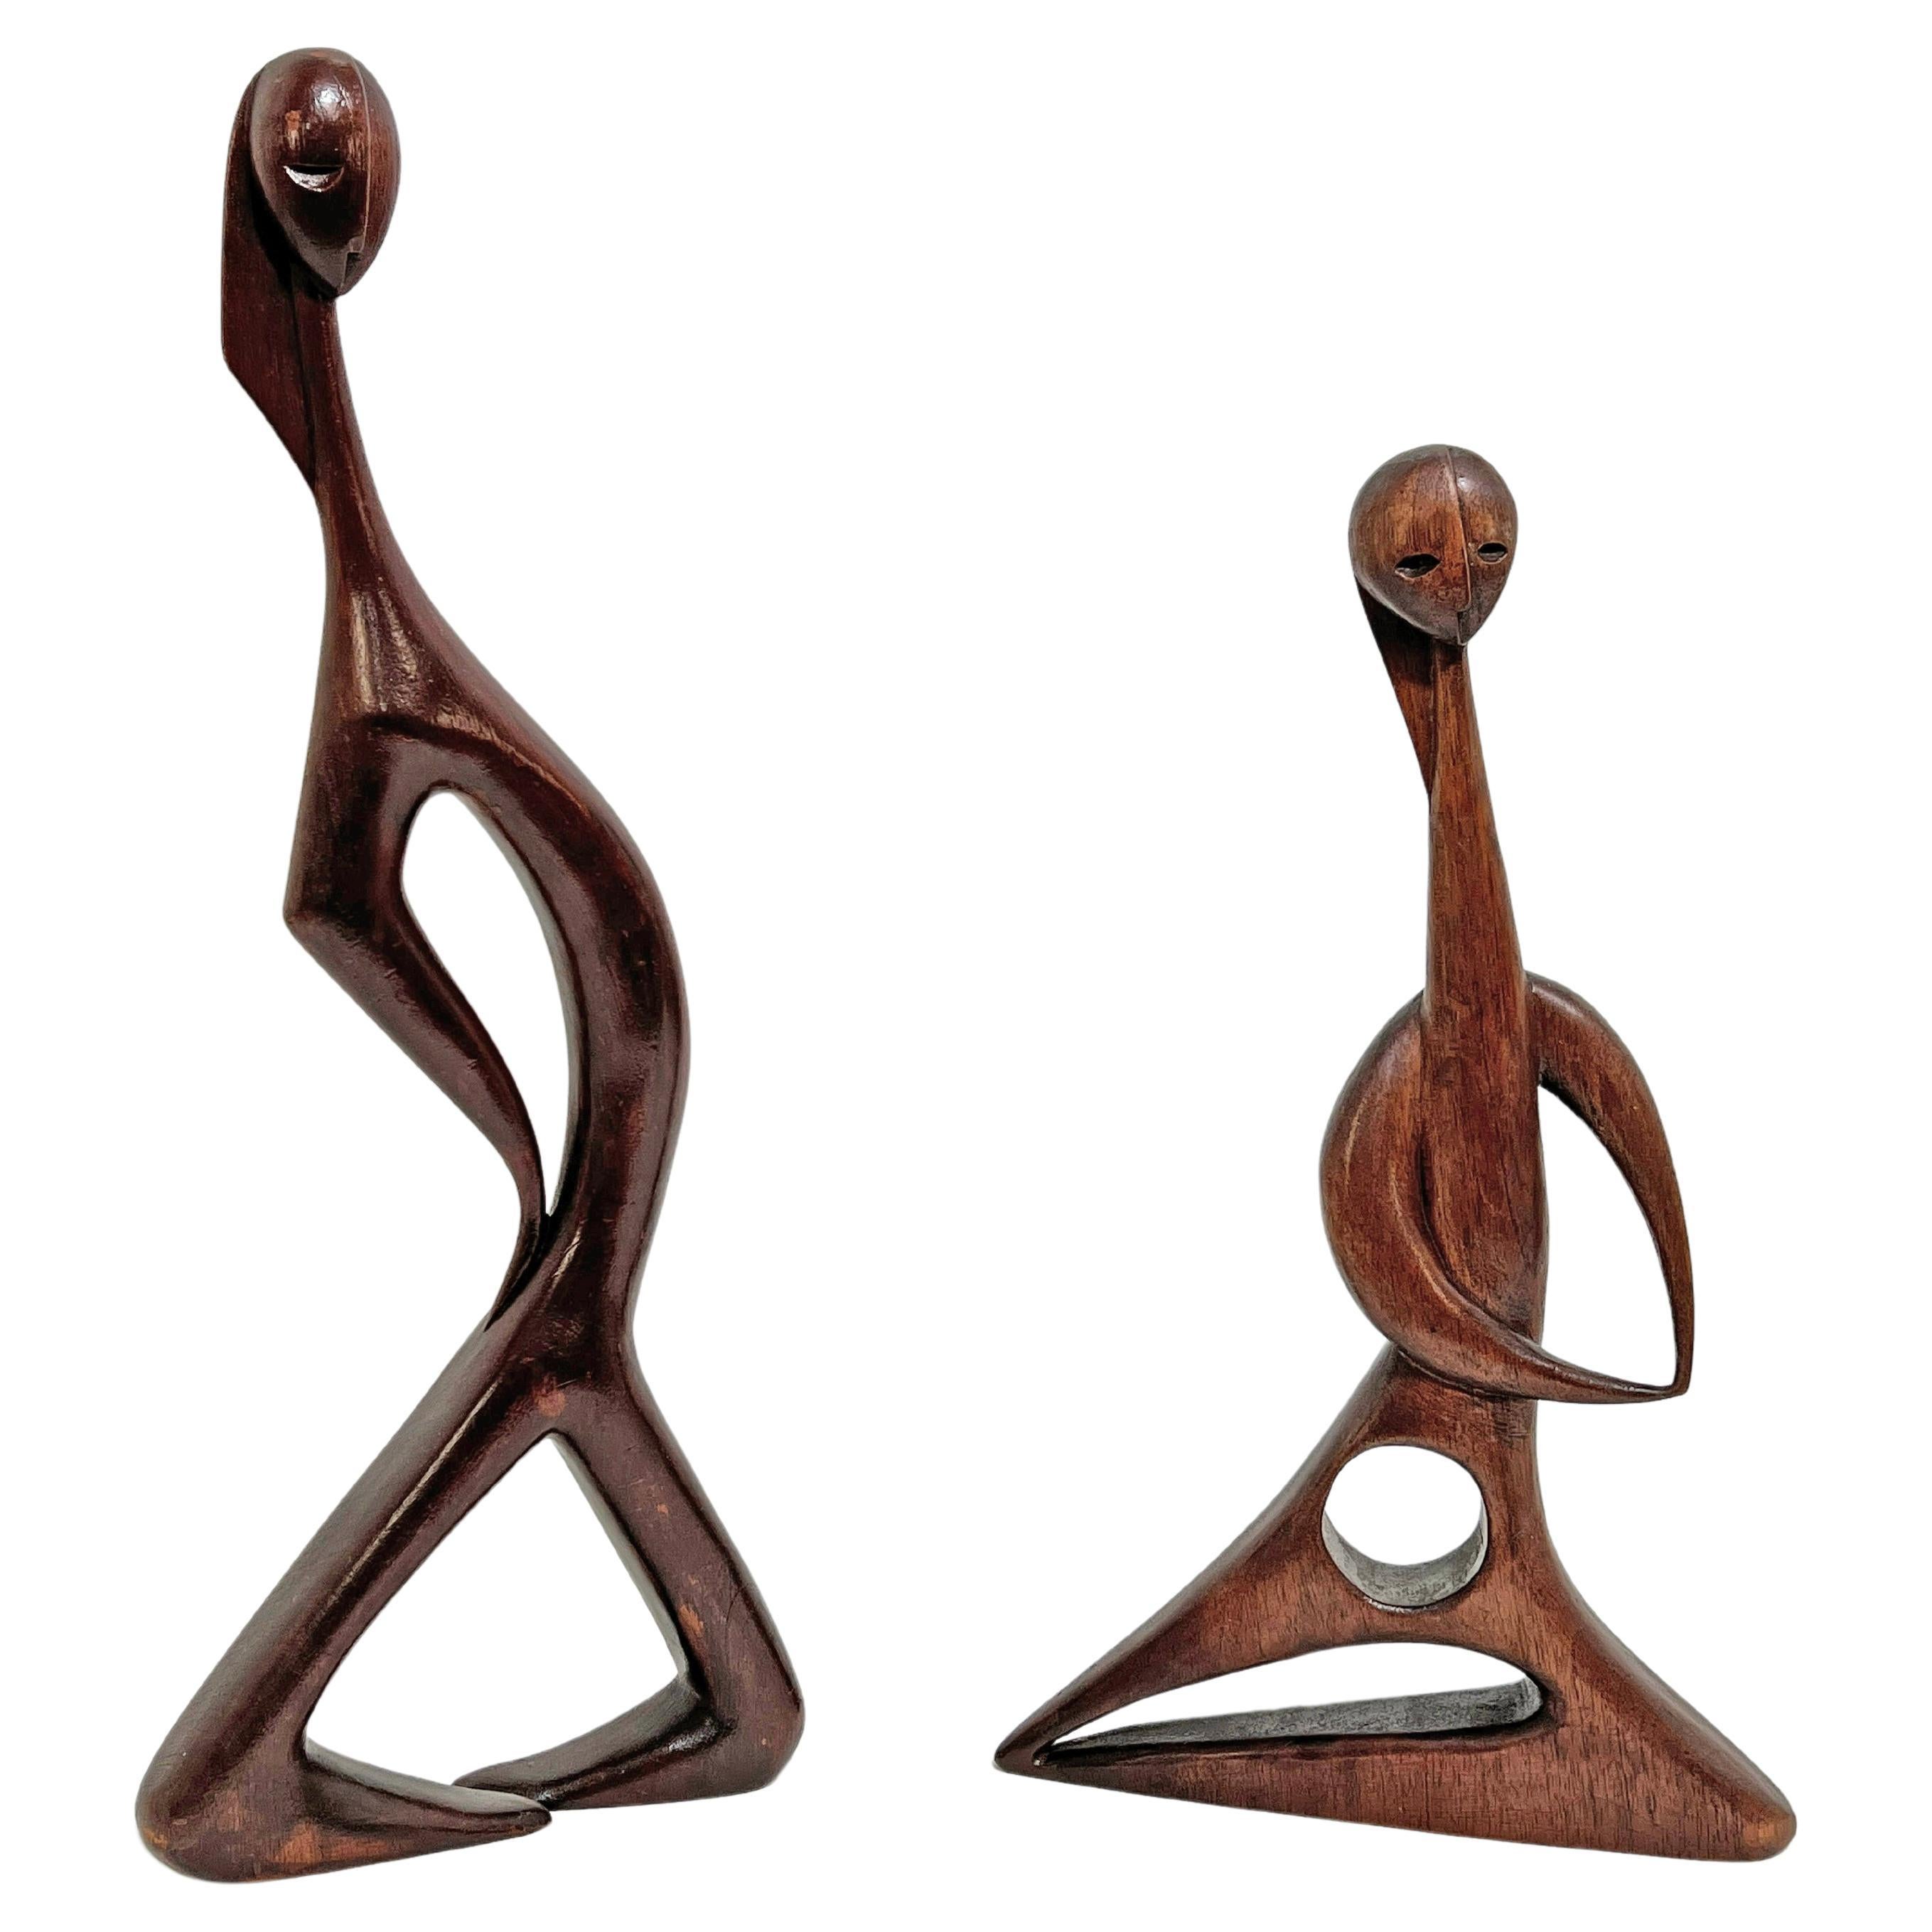 Pair of Modernist Carved Abstract Figural Scuptures by Stella Popowski, C. 1950s For Sale